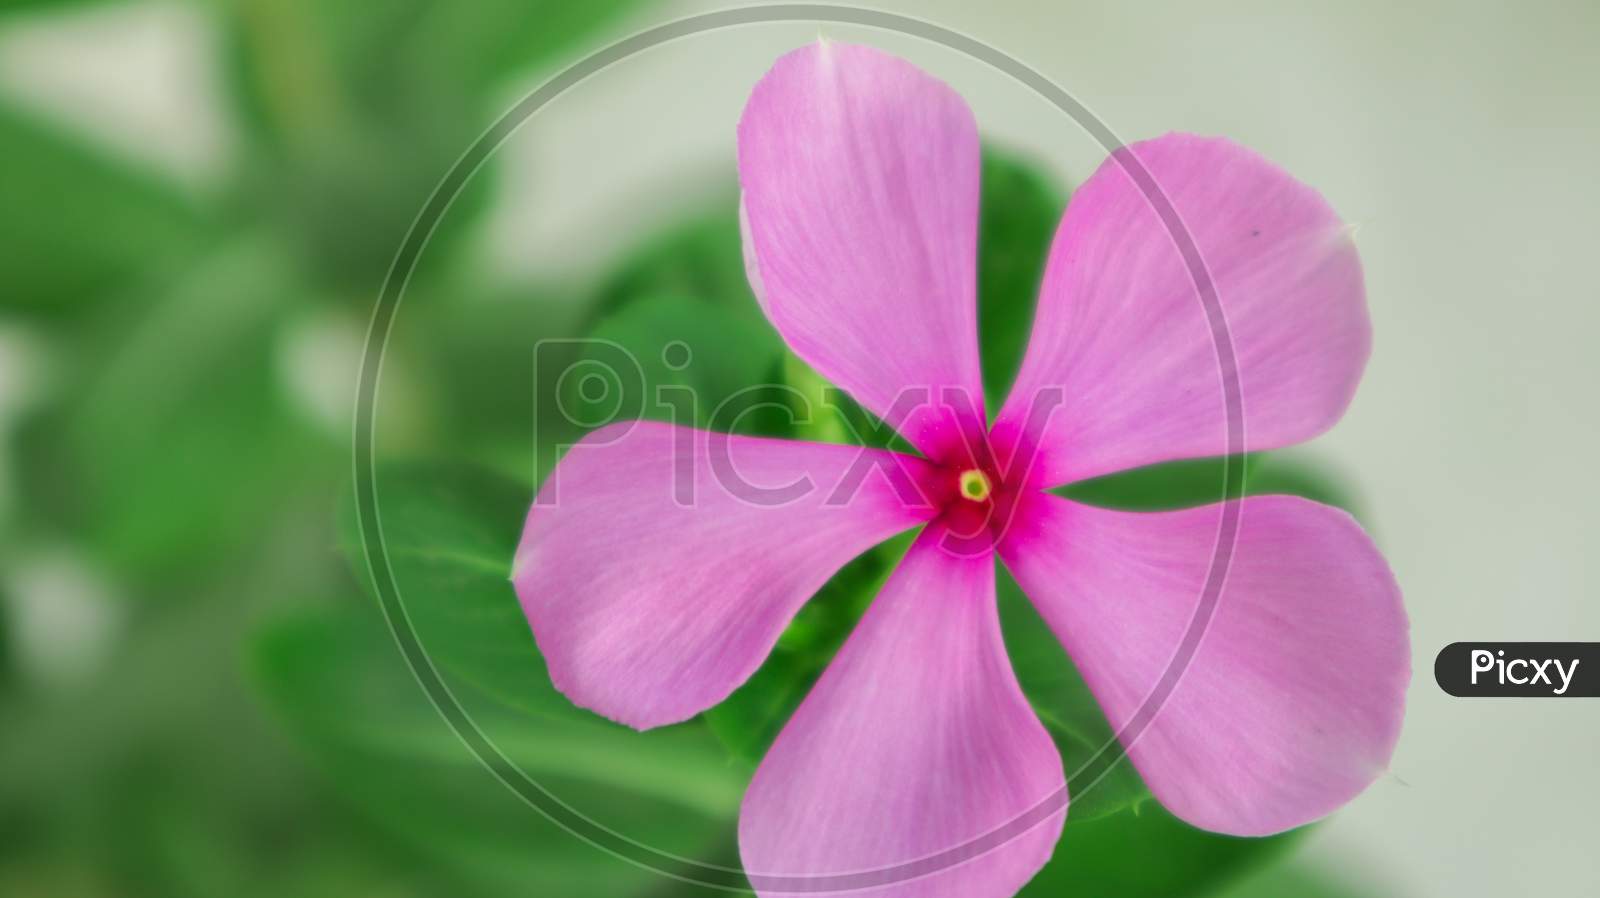 Colorful Madagascar periwinkle close up view indoor garden